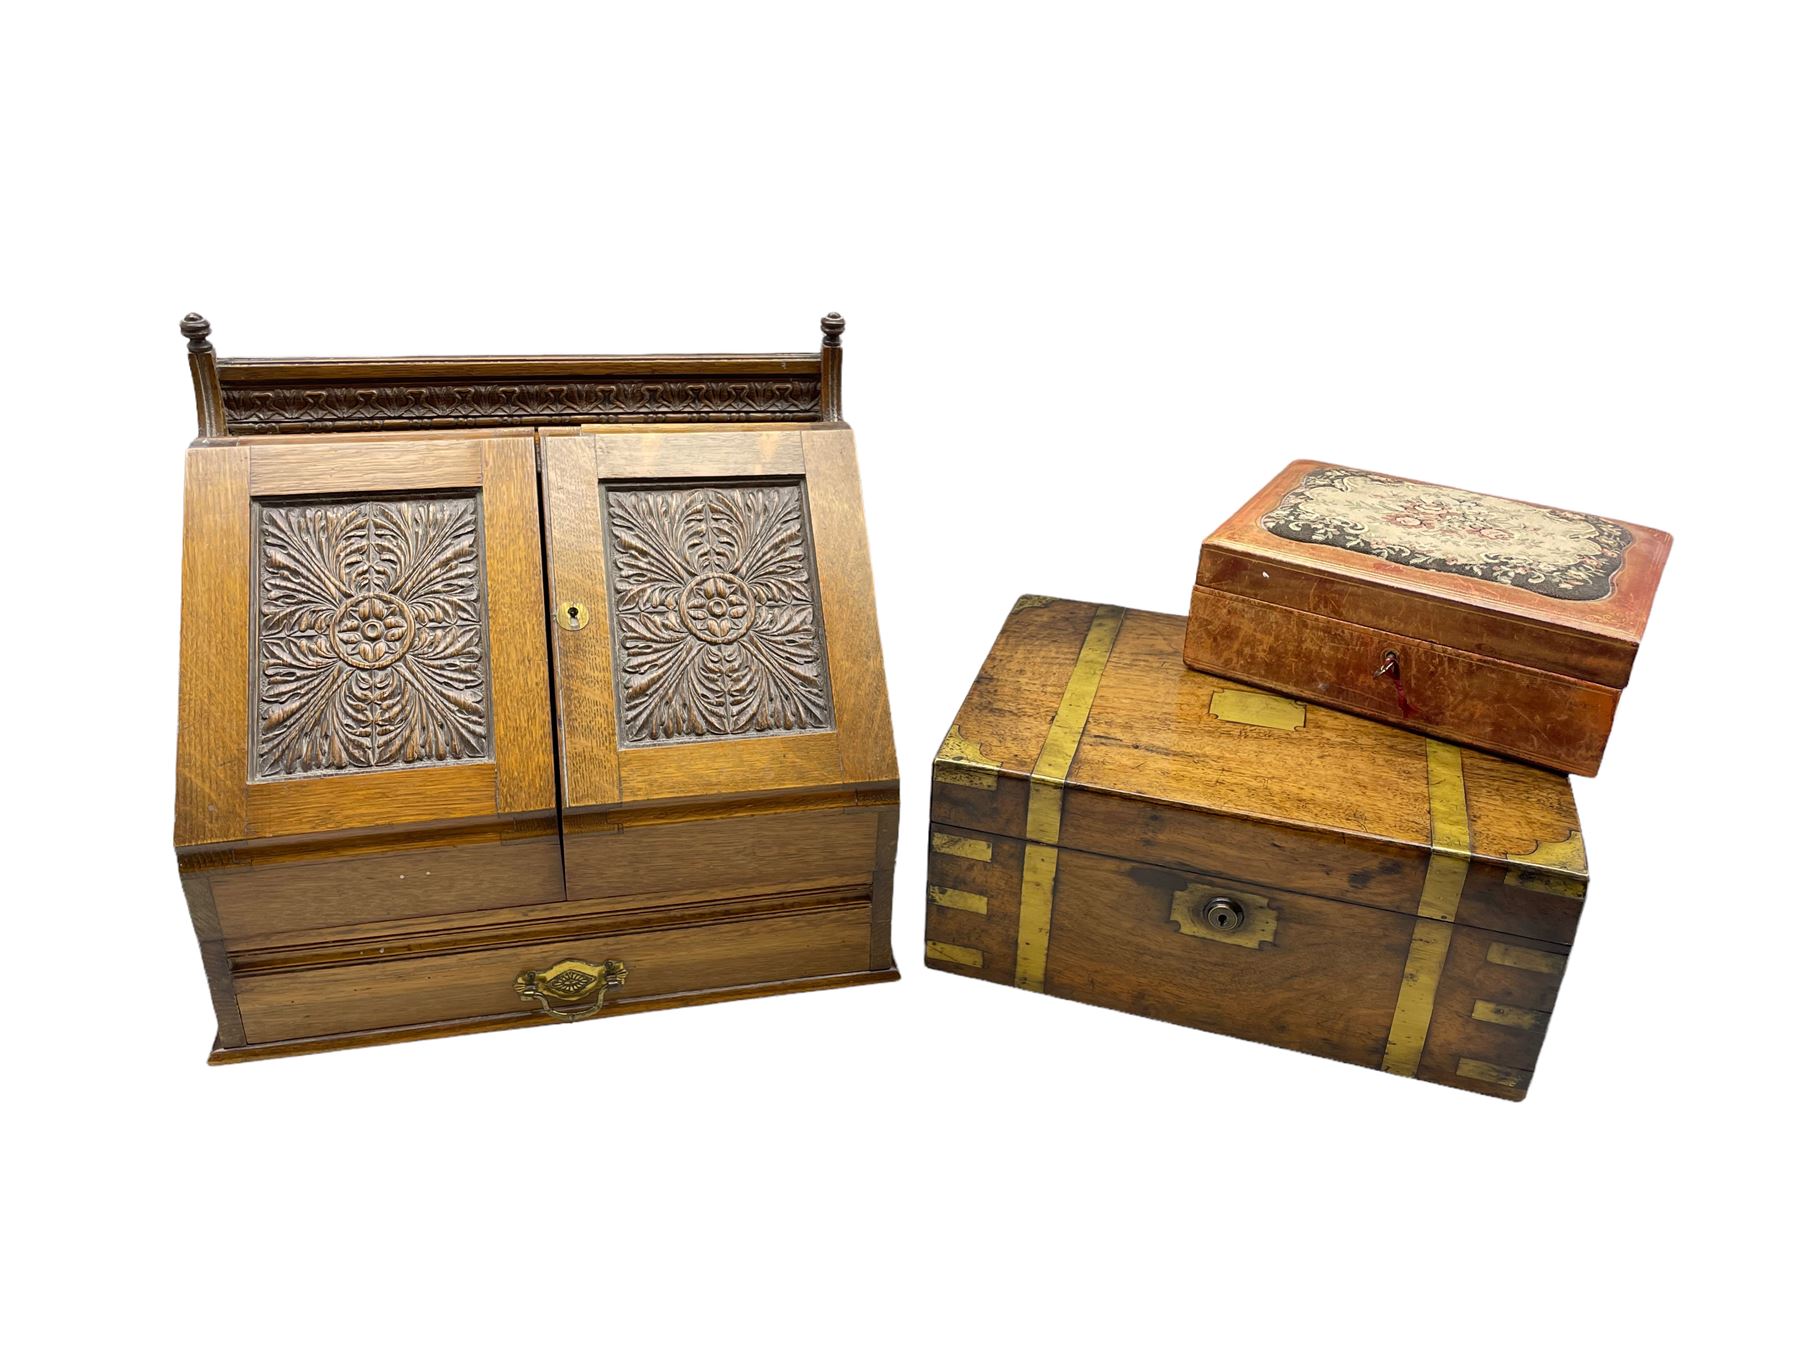 Edwardian oak correspondence box with two panelled doors carved with acanthus leaves below a raised